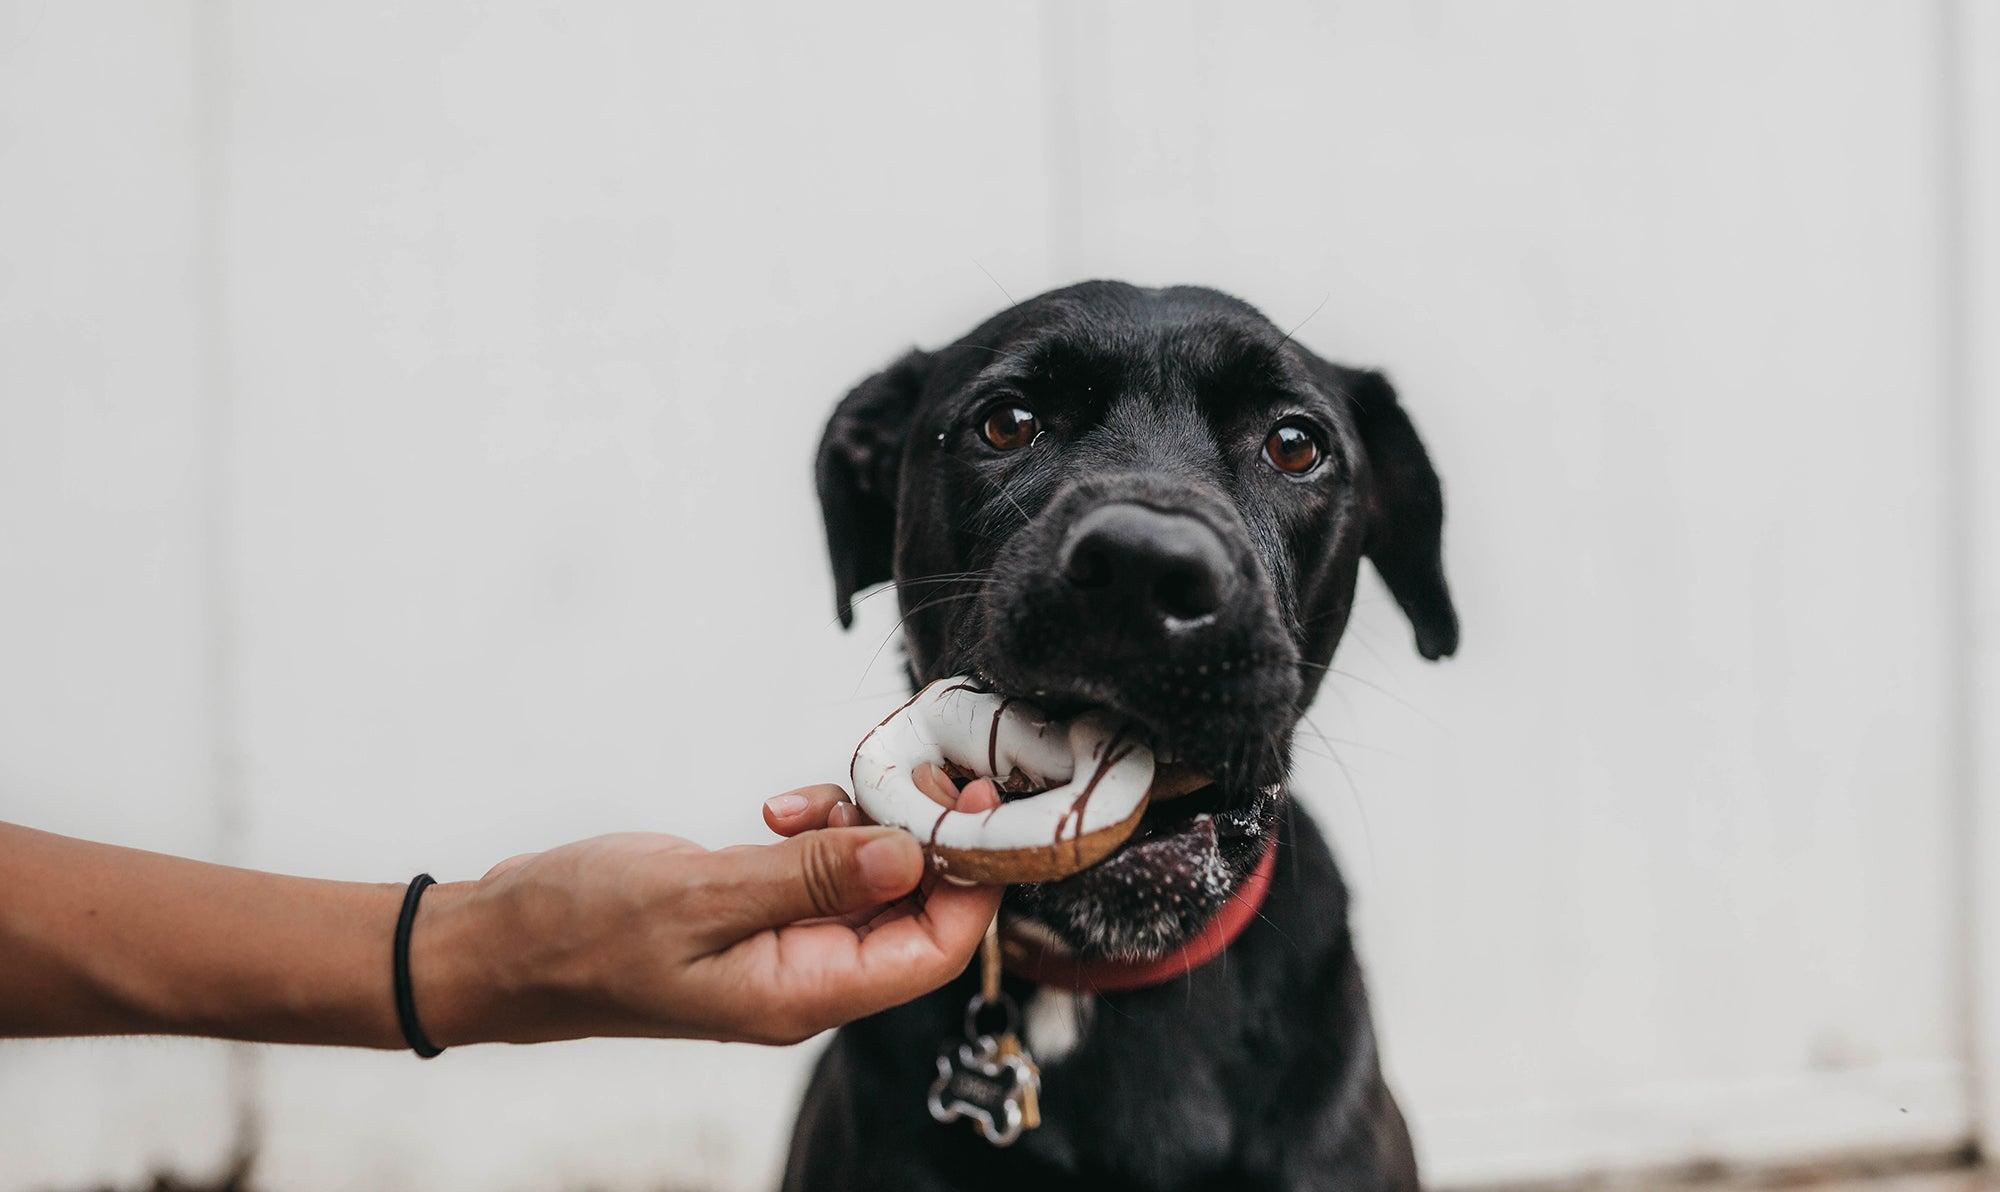 Dog Feeding Guide: What Food Should Dogs Eat?